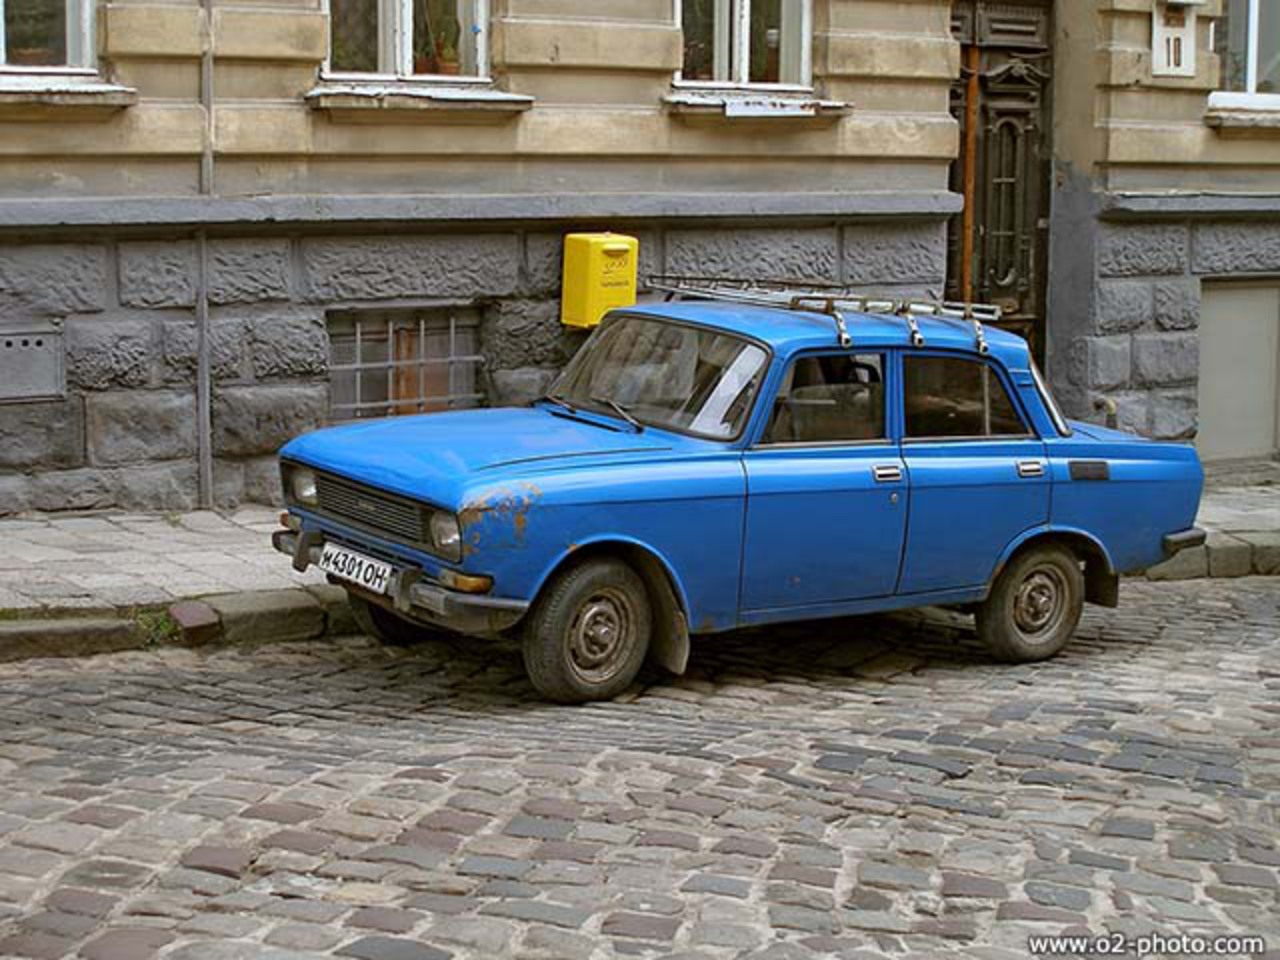 Moskvitch 2140 Photo Gallery: Photo #12 out of 9, Image Size - 750 ...